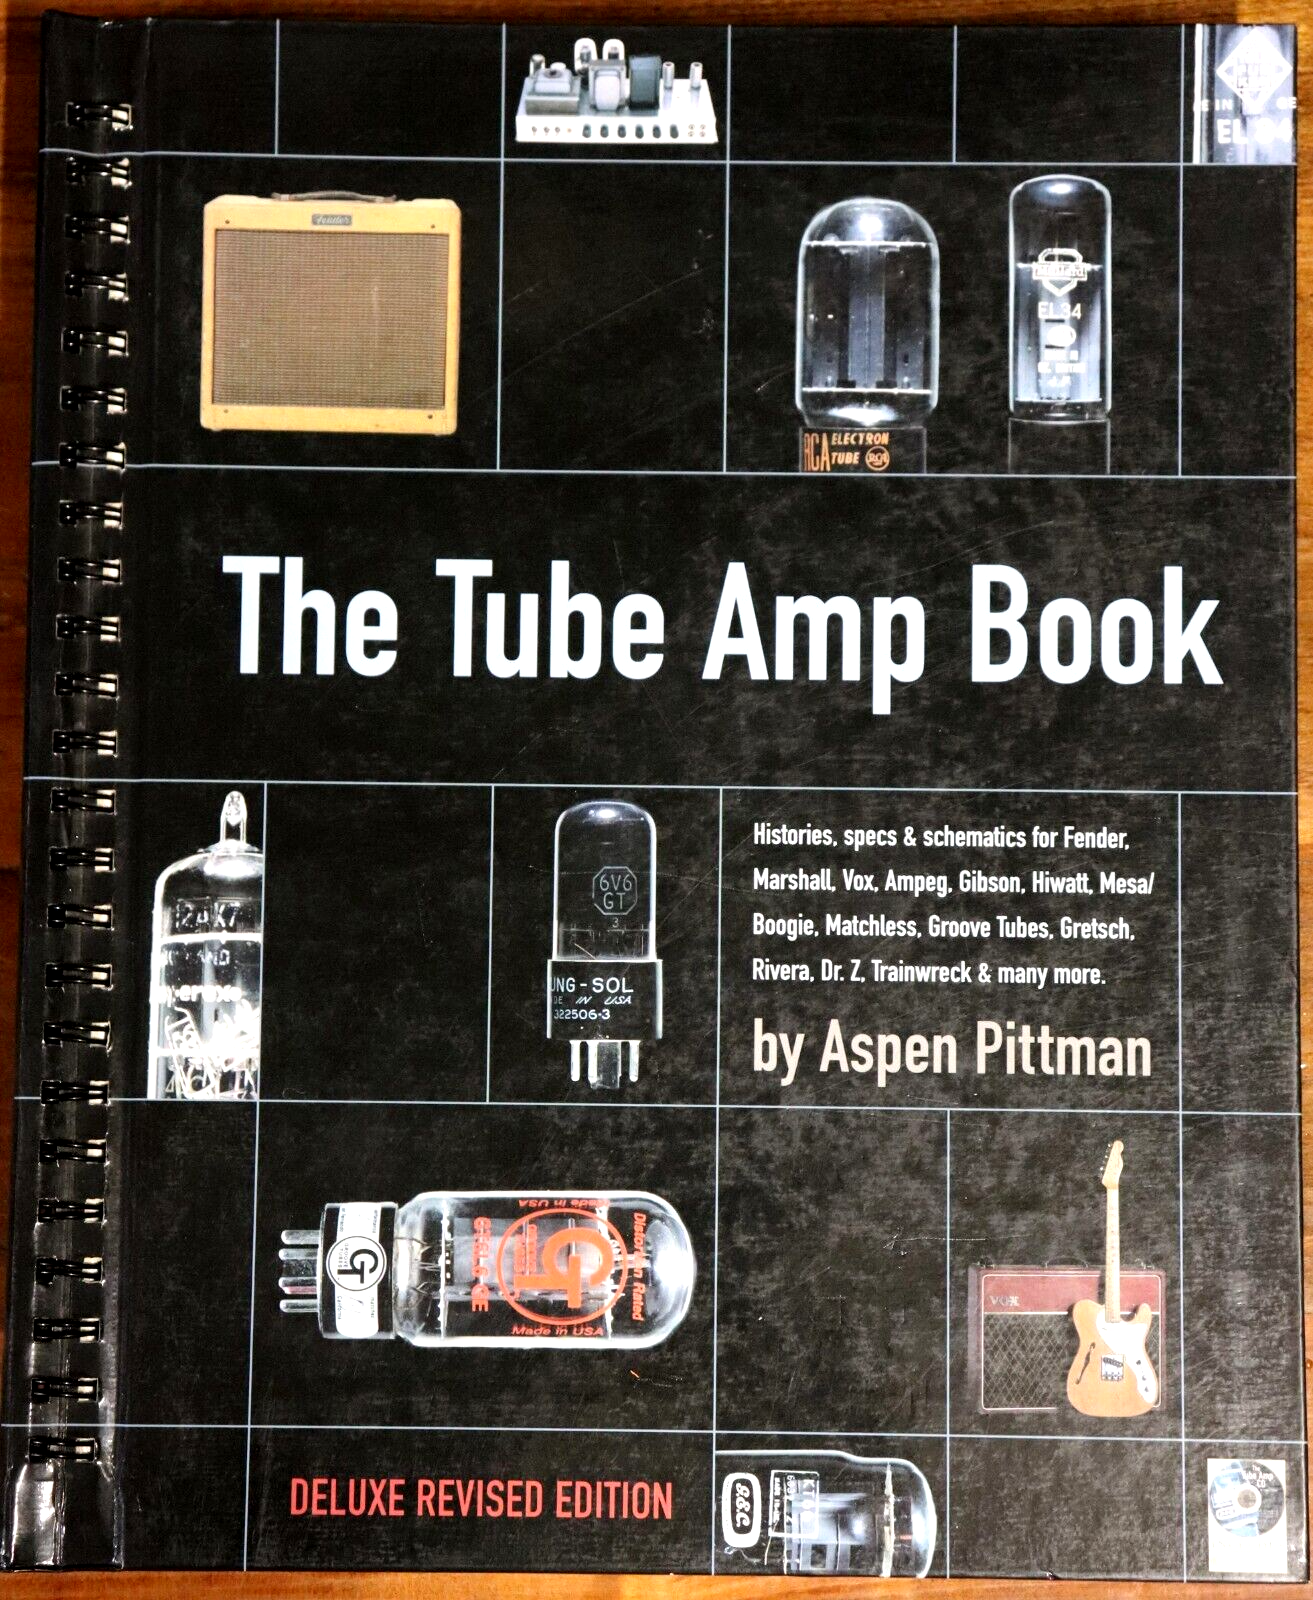 The Tube Amp Book by Aspen Pittman - 2007 - Guitar Amplifier Reference Book